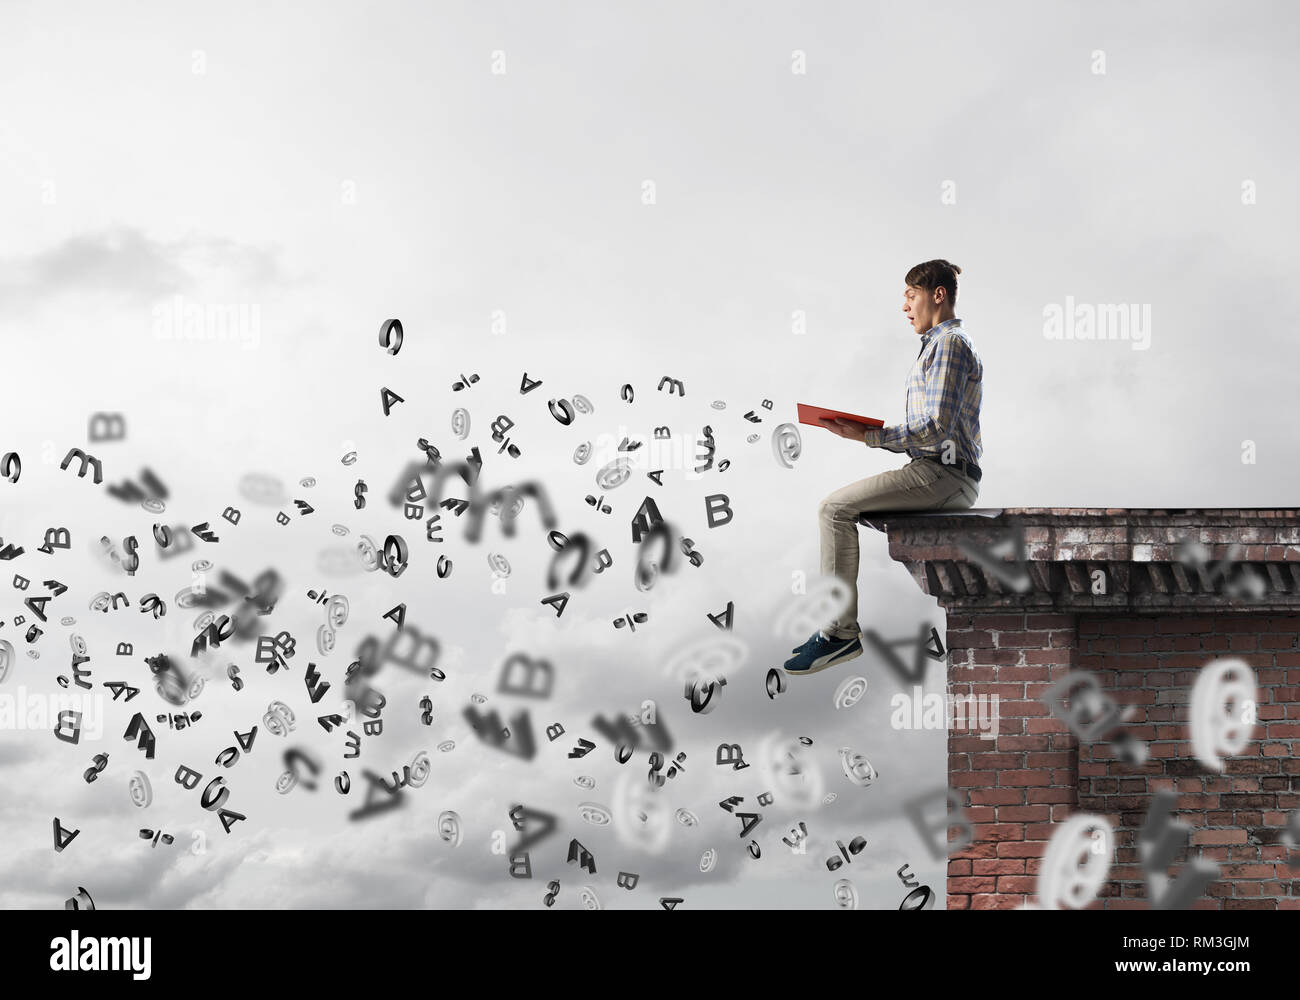 Man on roof edge reading book and symbols flying around Stock Photo